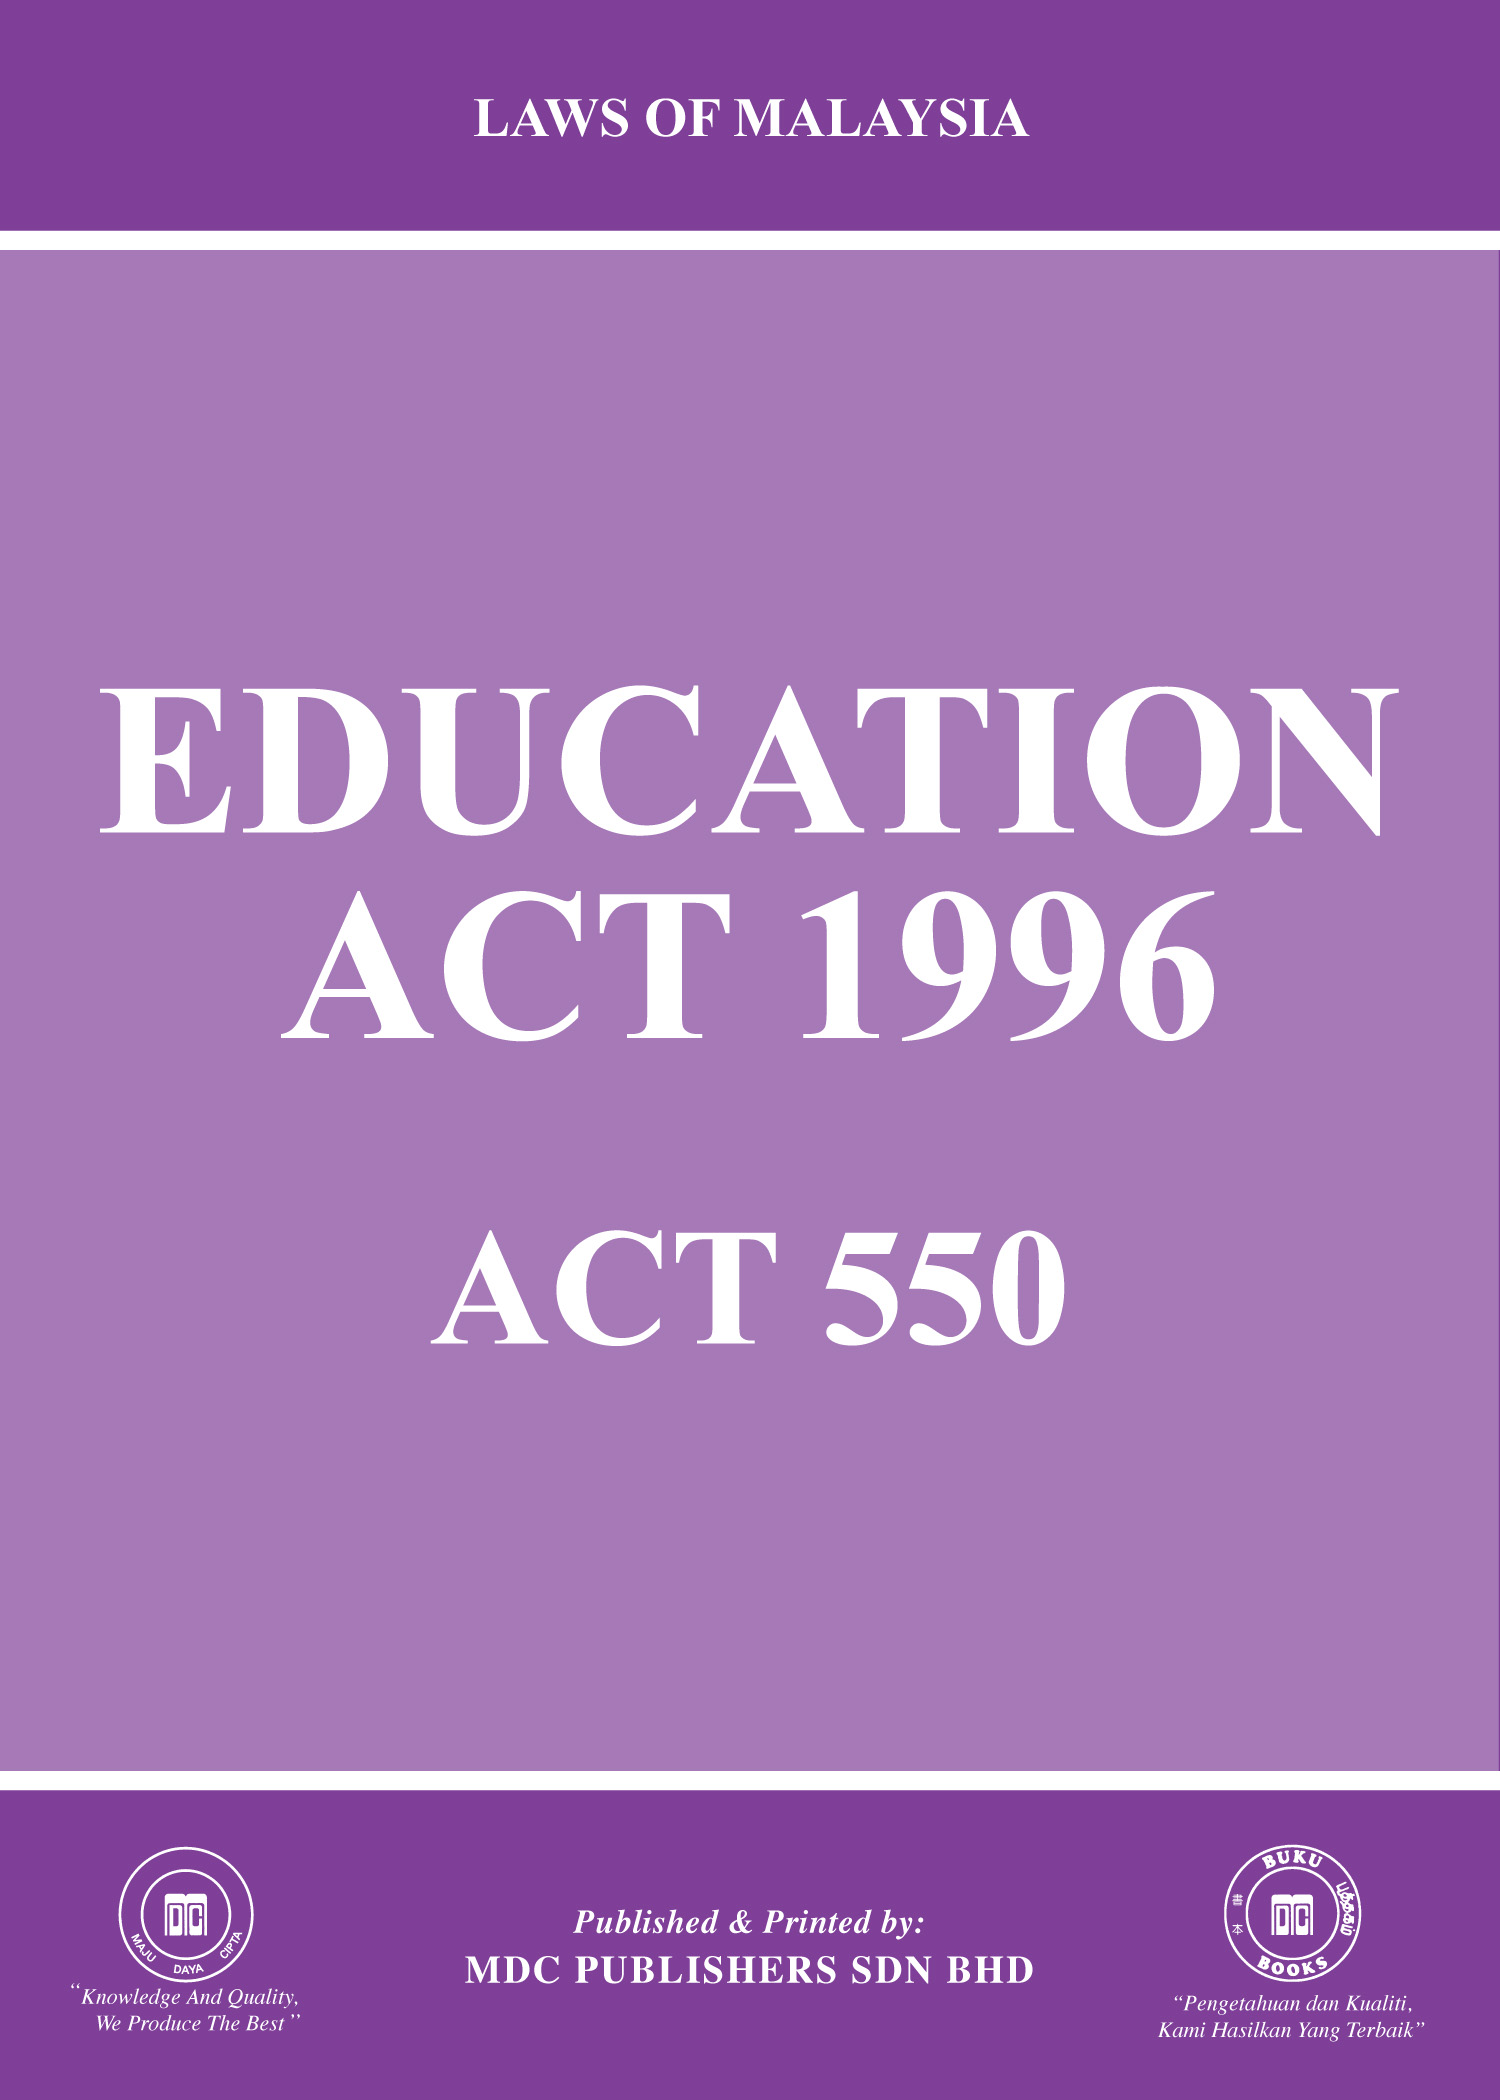 how to cite education act 1996